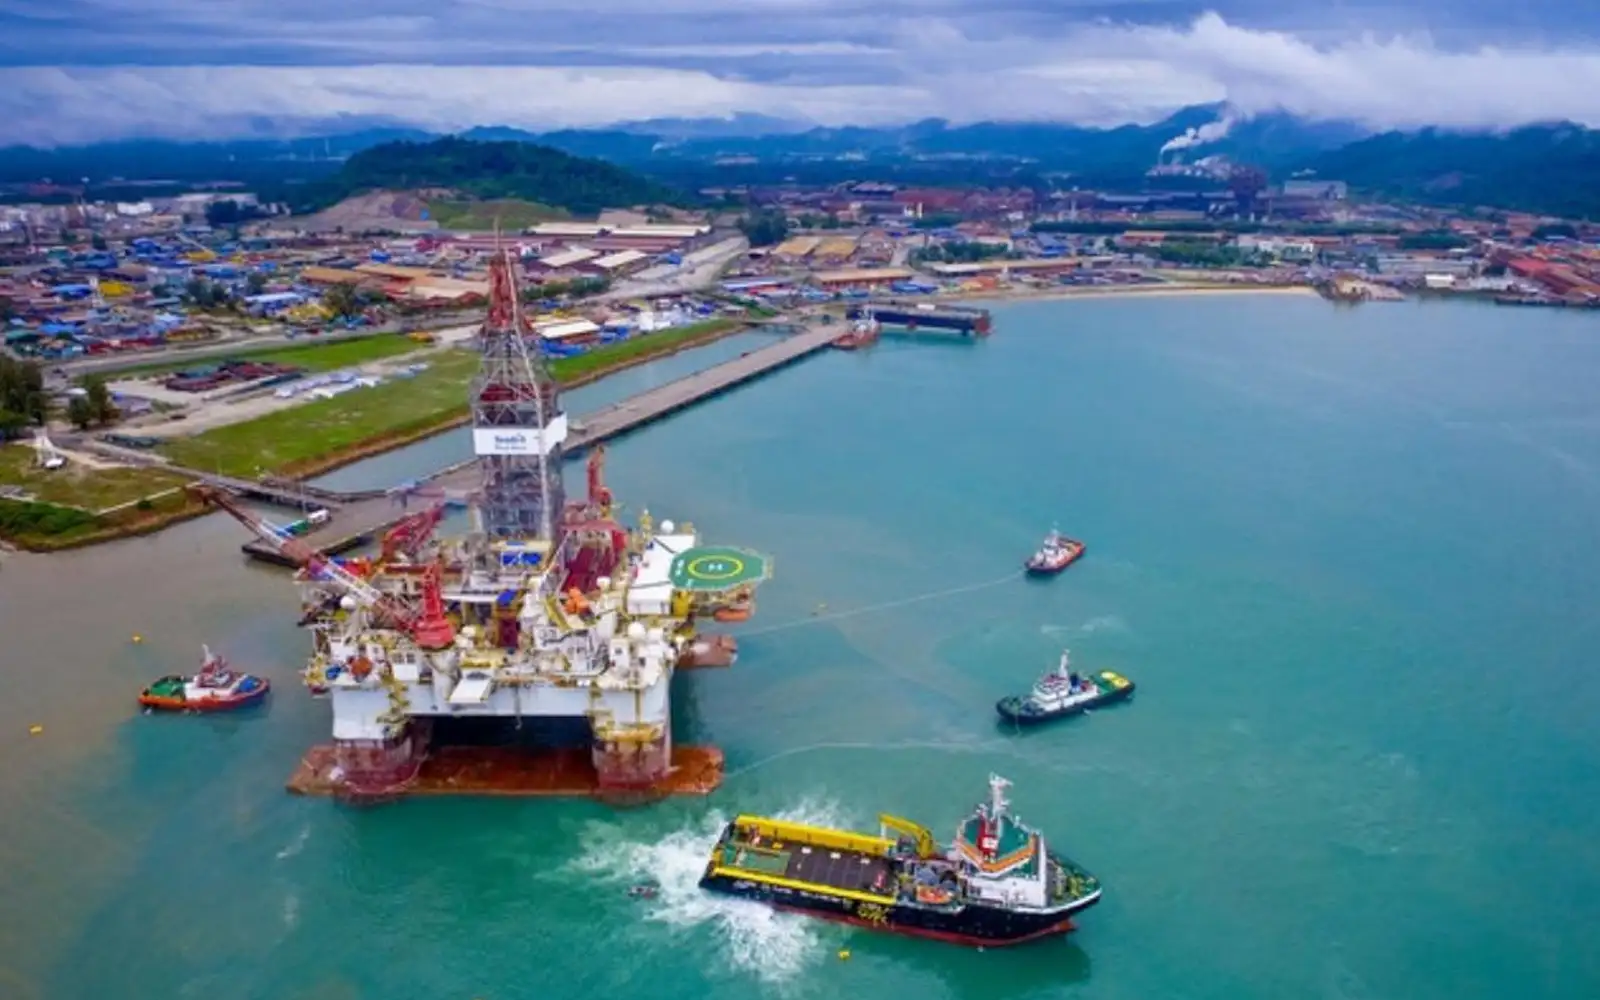 territorial sea act stands, says govt after rejection by terengganu